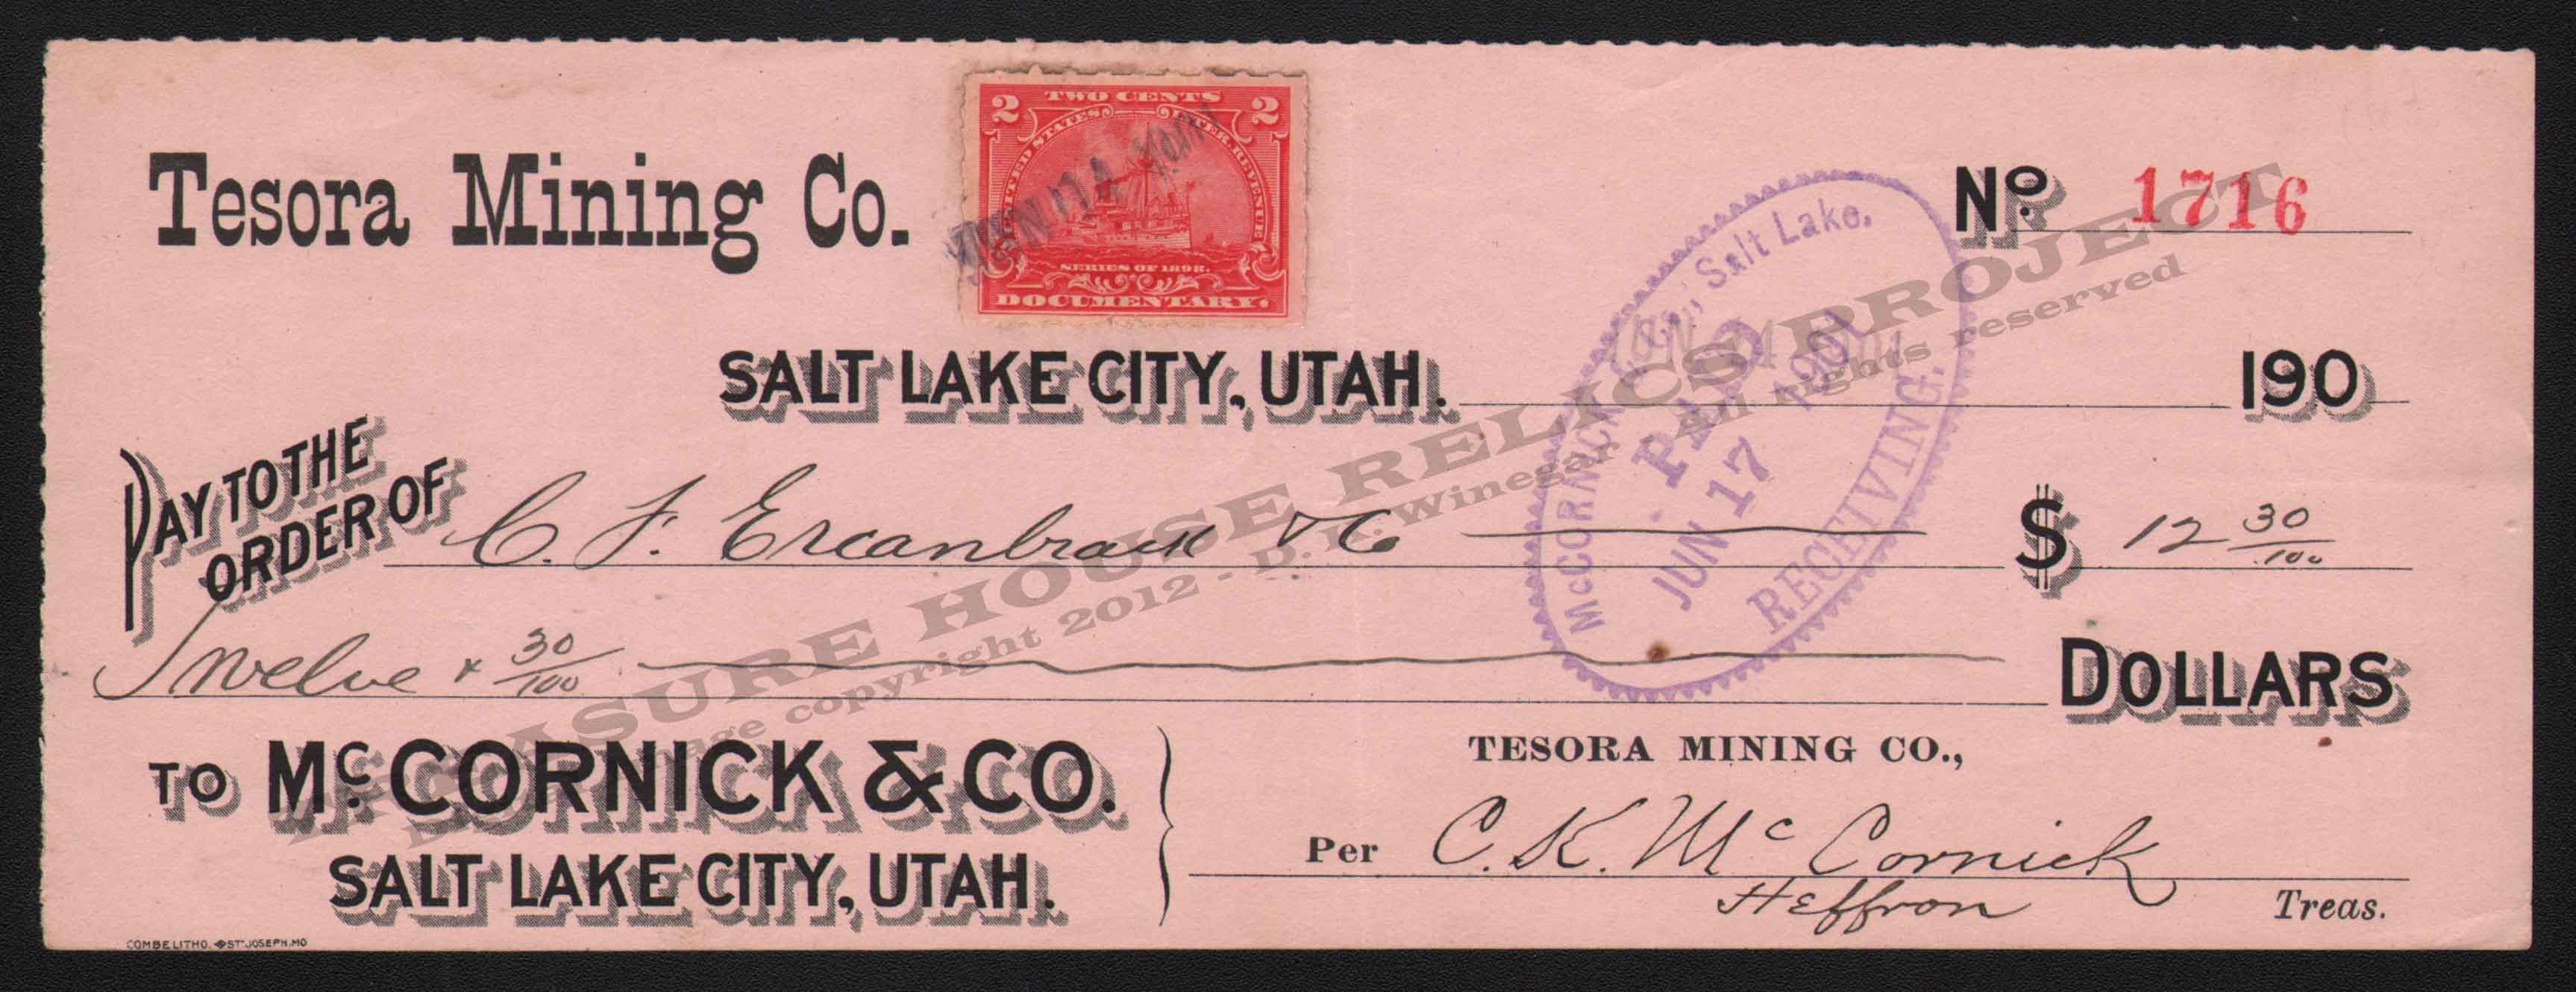 LETTERHEAD/CHECK_THOMPSON_QUINCY_CONSOLIDATED_MINING_COMPANY_524_1914_GB_400_CROP_EMBOSS.jpg